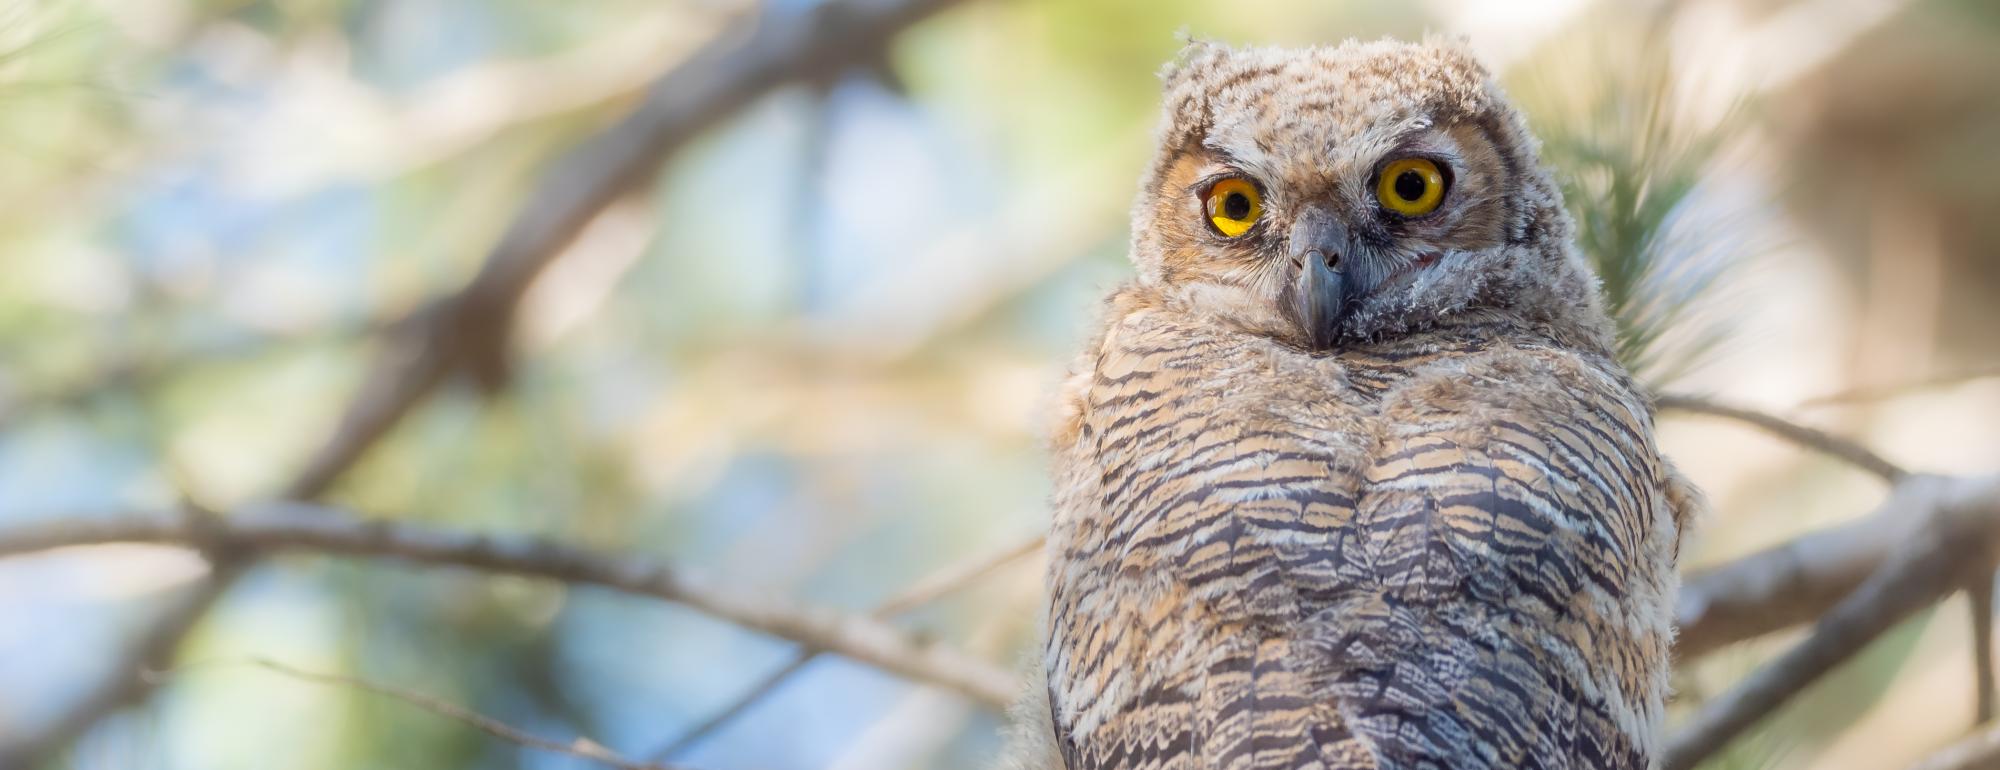 Young Great Horned Owl returned to its home